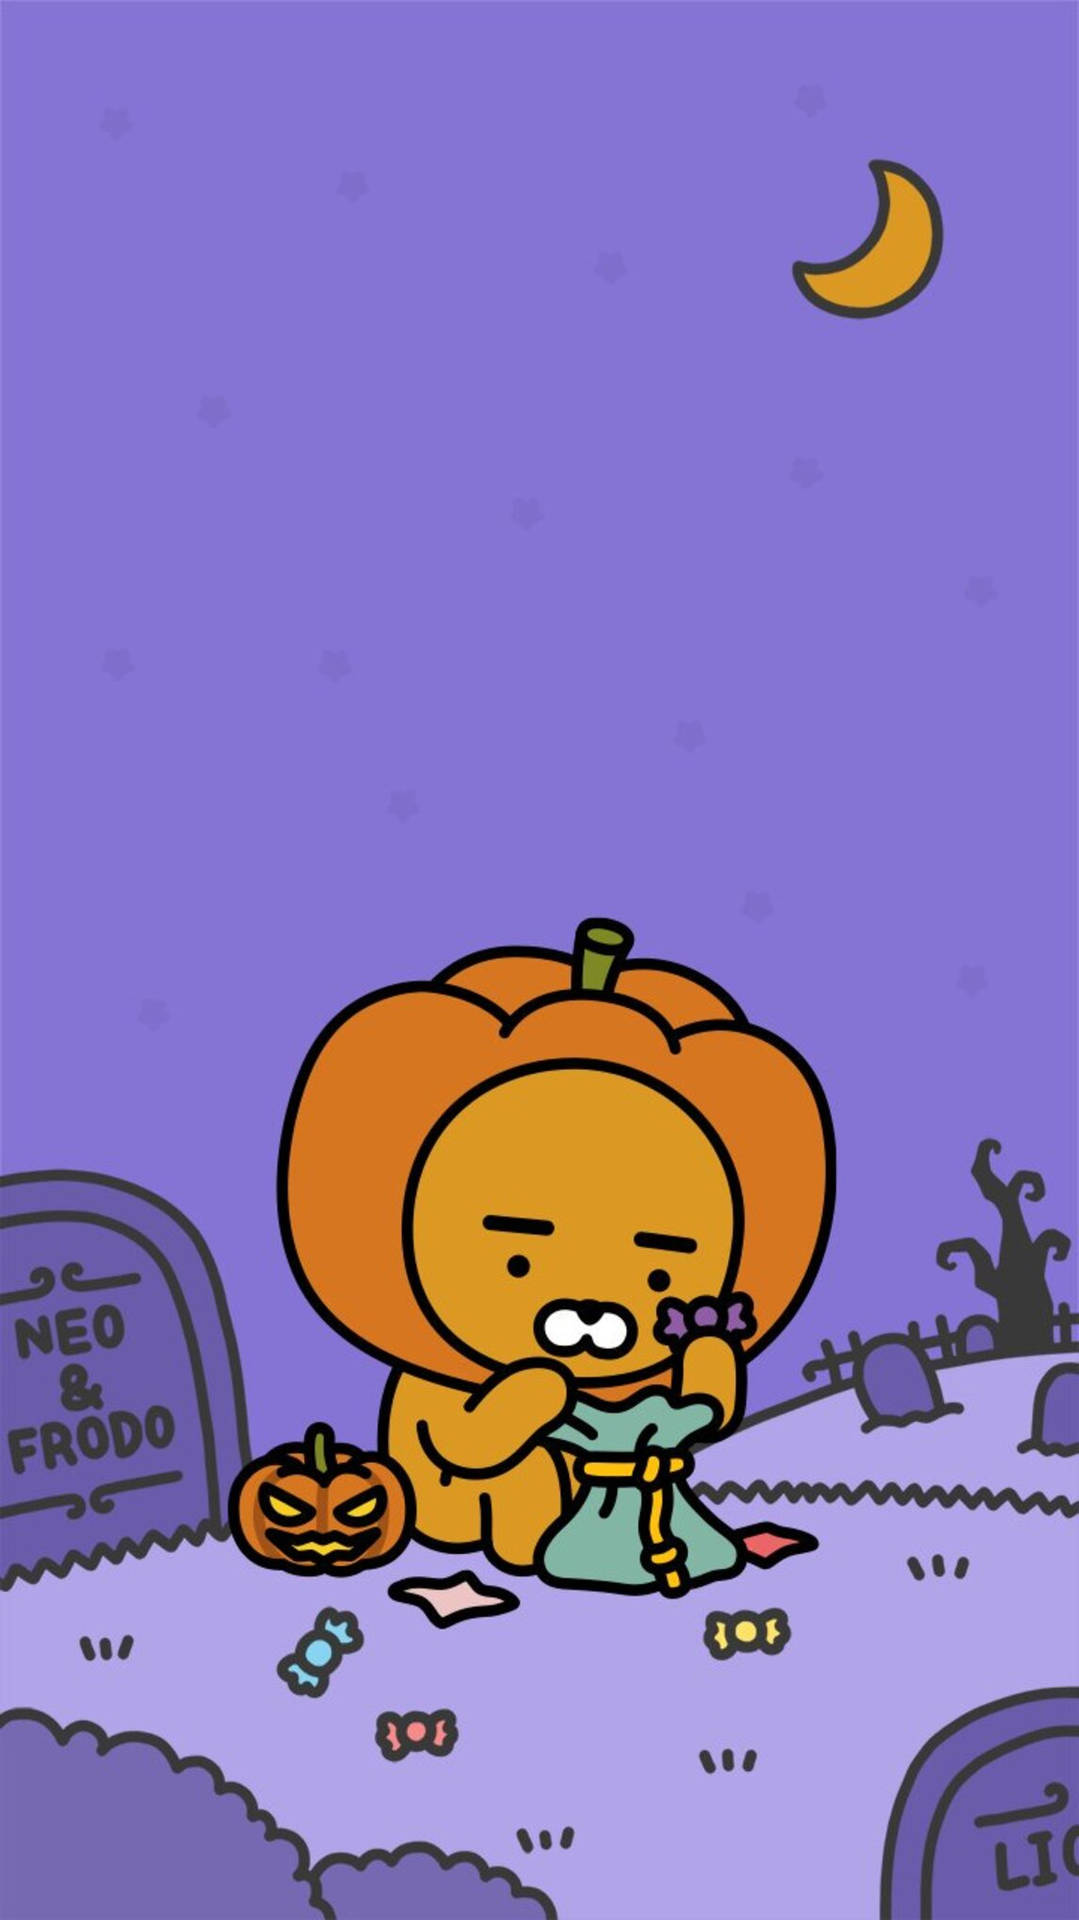 Join Ryan The Kakao Friend For A Spooky Halloween Background